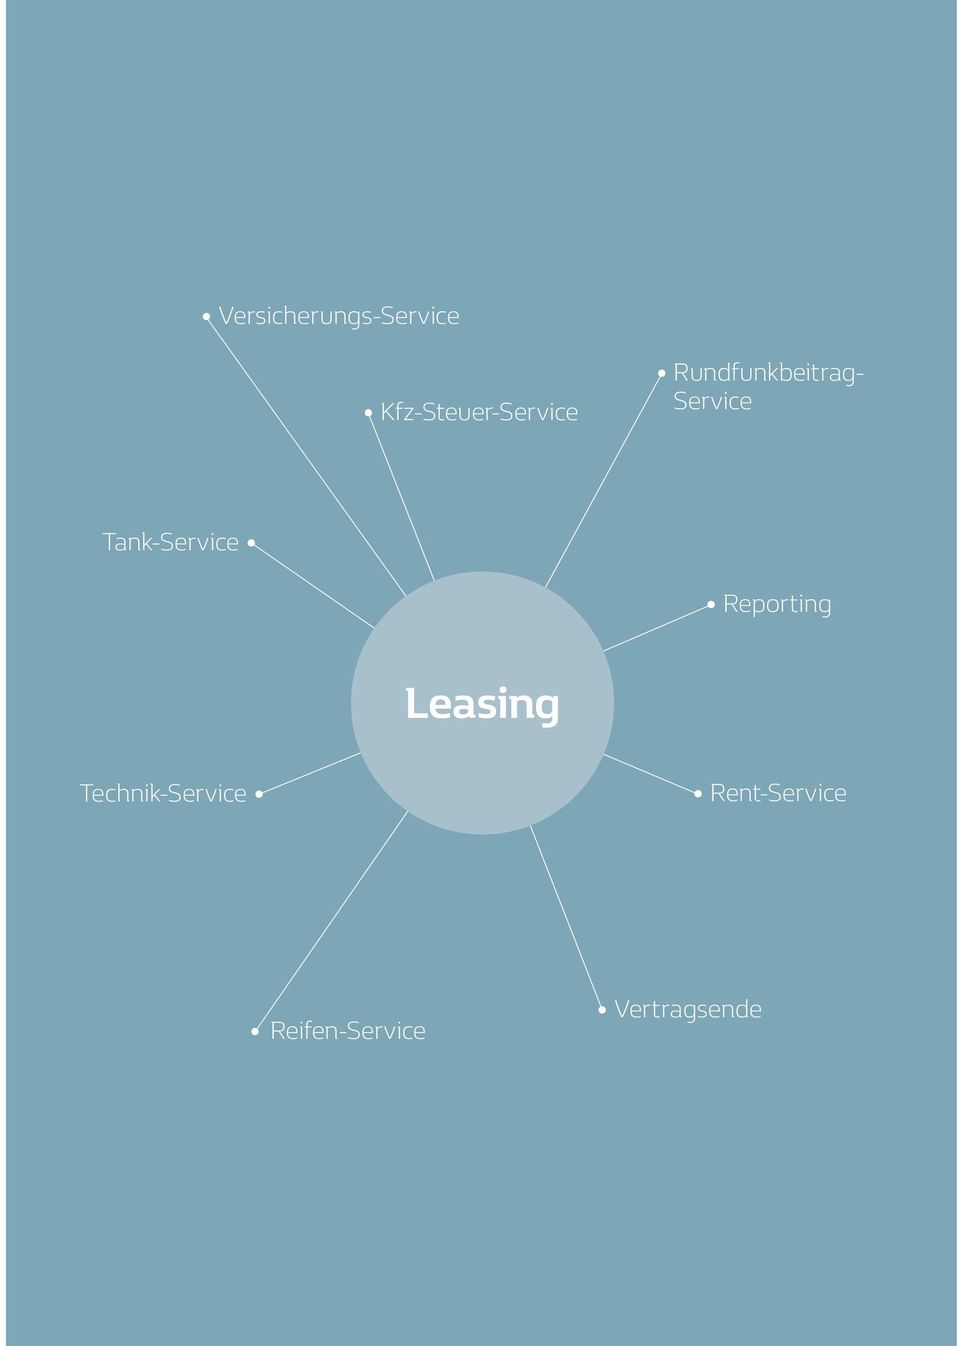 Service Tank-Service Reporting Leasing